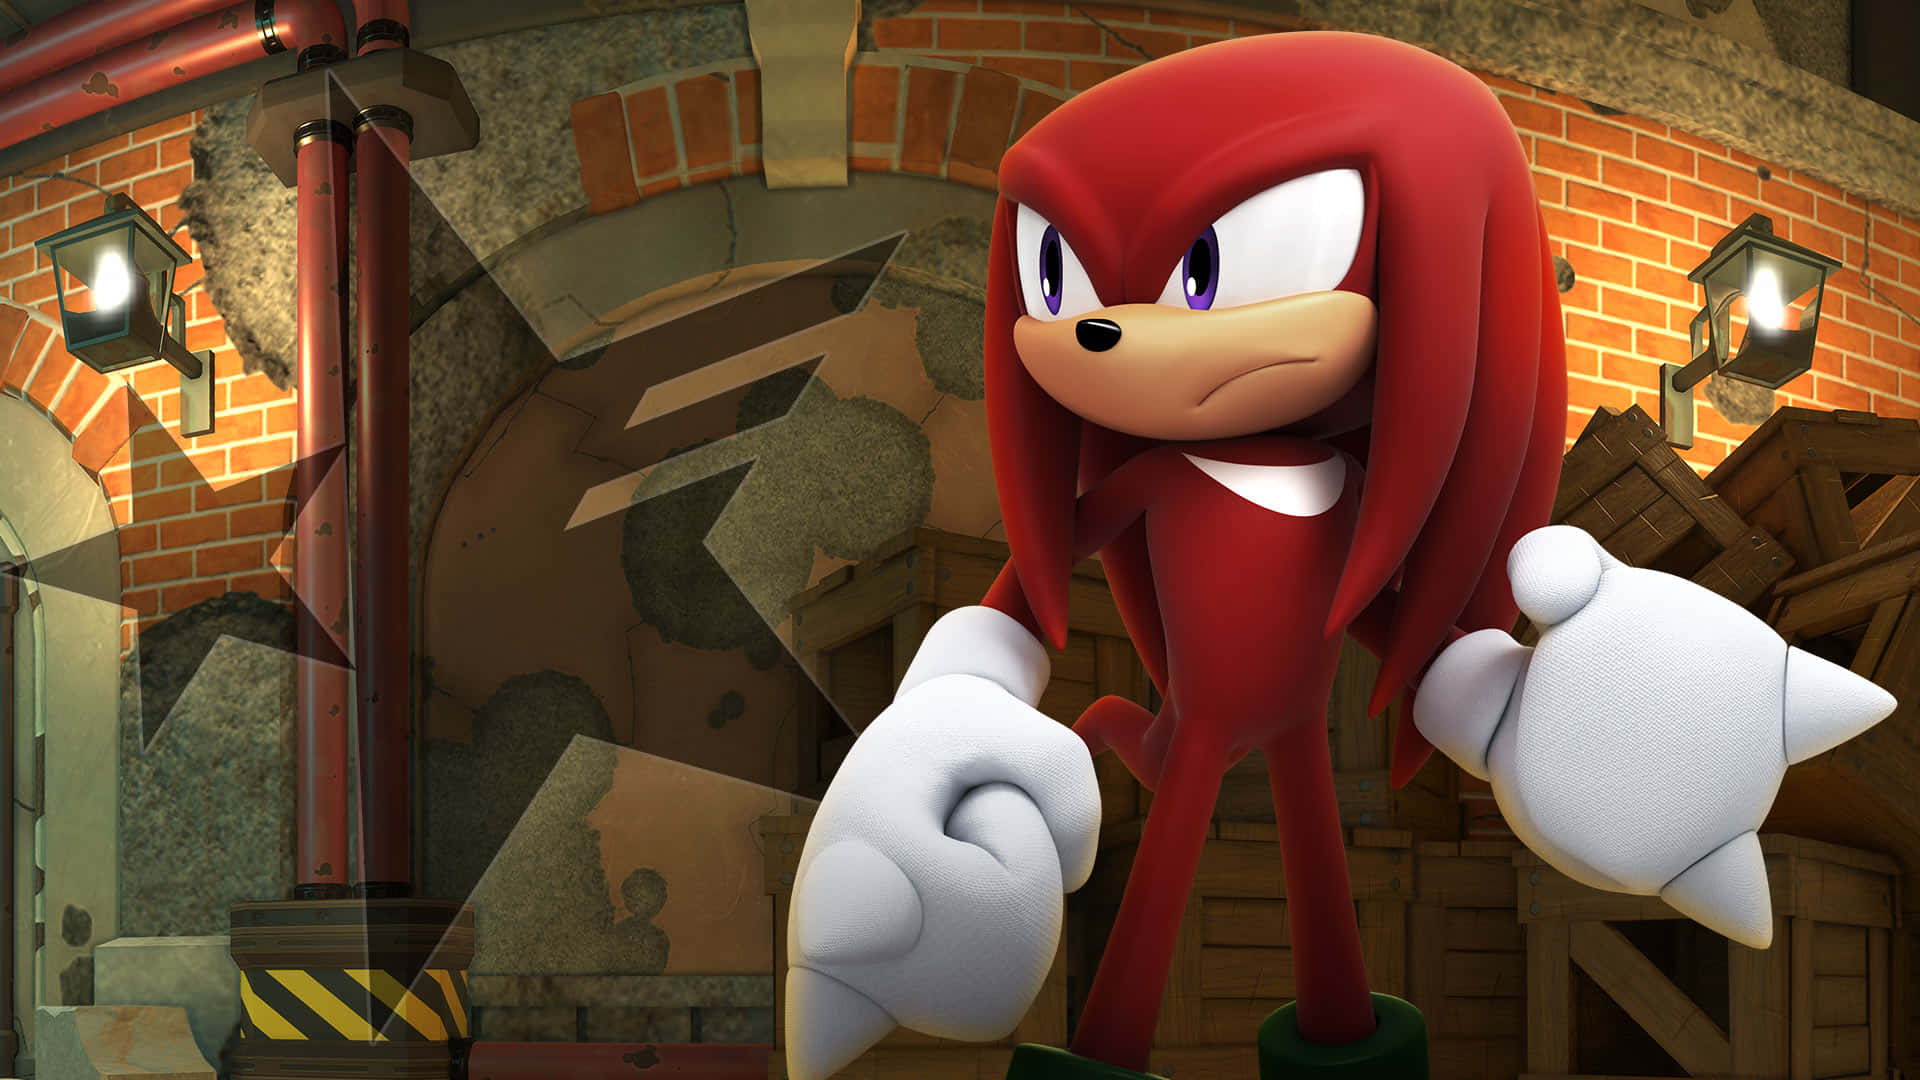 Sonic The Hedgehog In A Red Outfit Standing In Front Of A Brick Wall Background